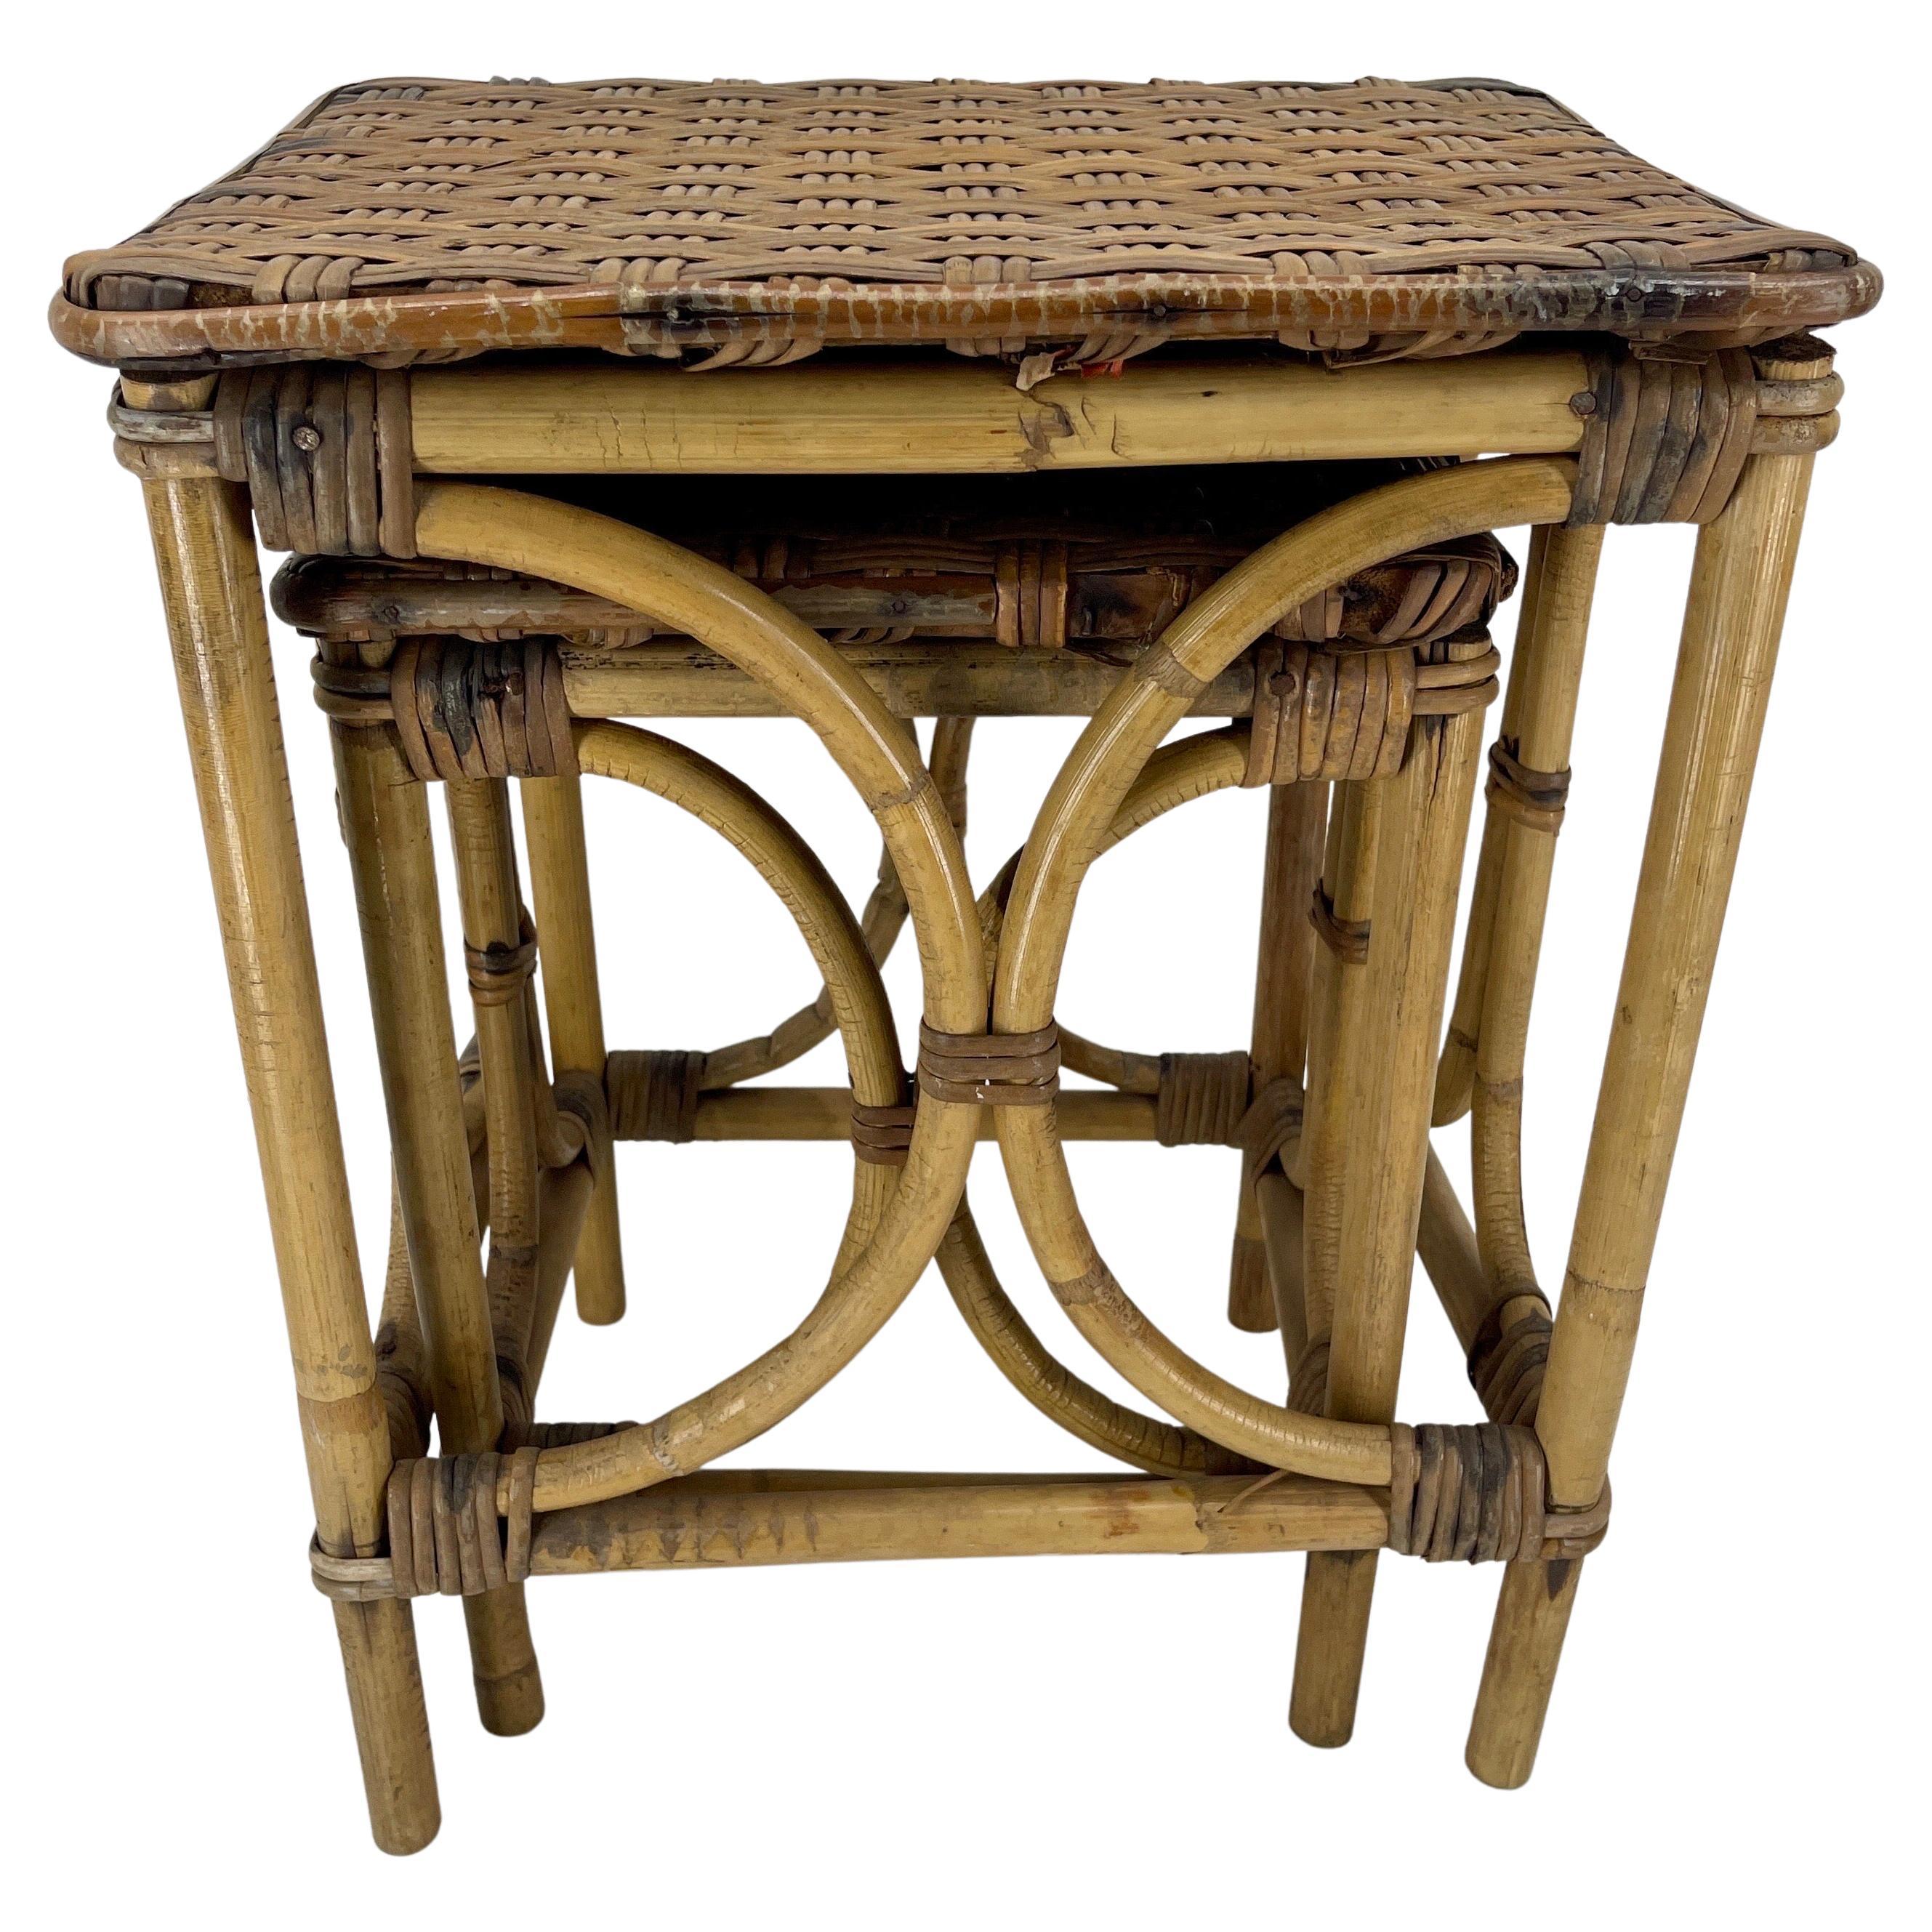 Midcentury Bamboo and Rattan Woven Top Vintage Nesting Tables 

Set of 2 vintage nesting tables each with rich color and texture, comprised of a bamboo frame and rattan surface. These look fantastic standing alone as a decorative piece or